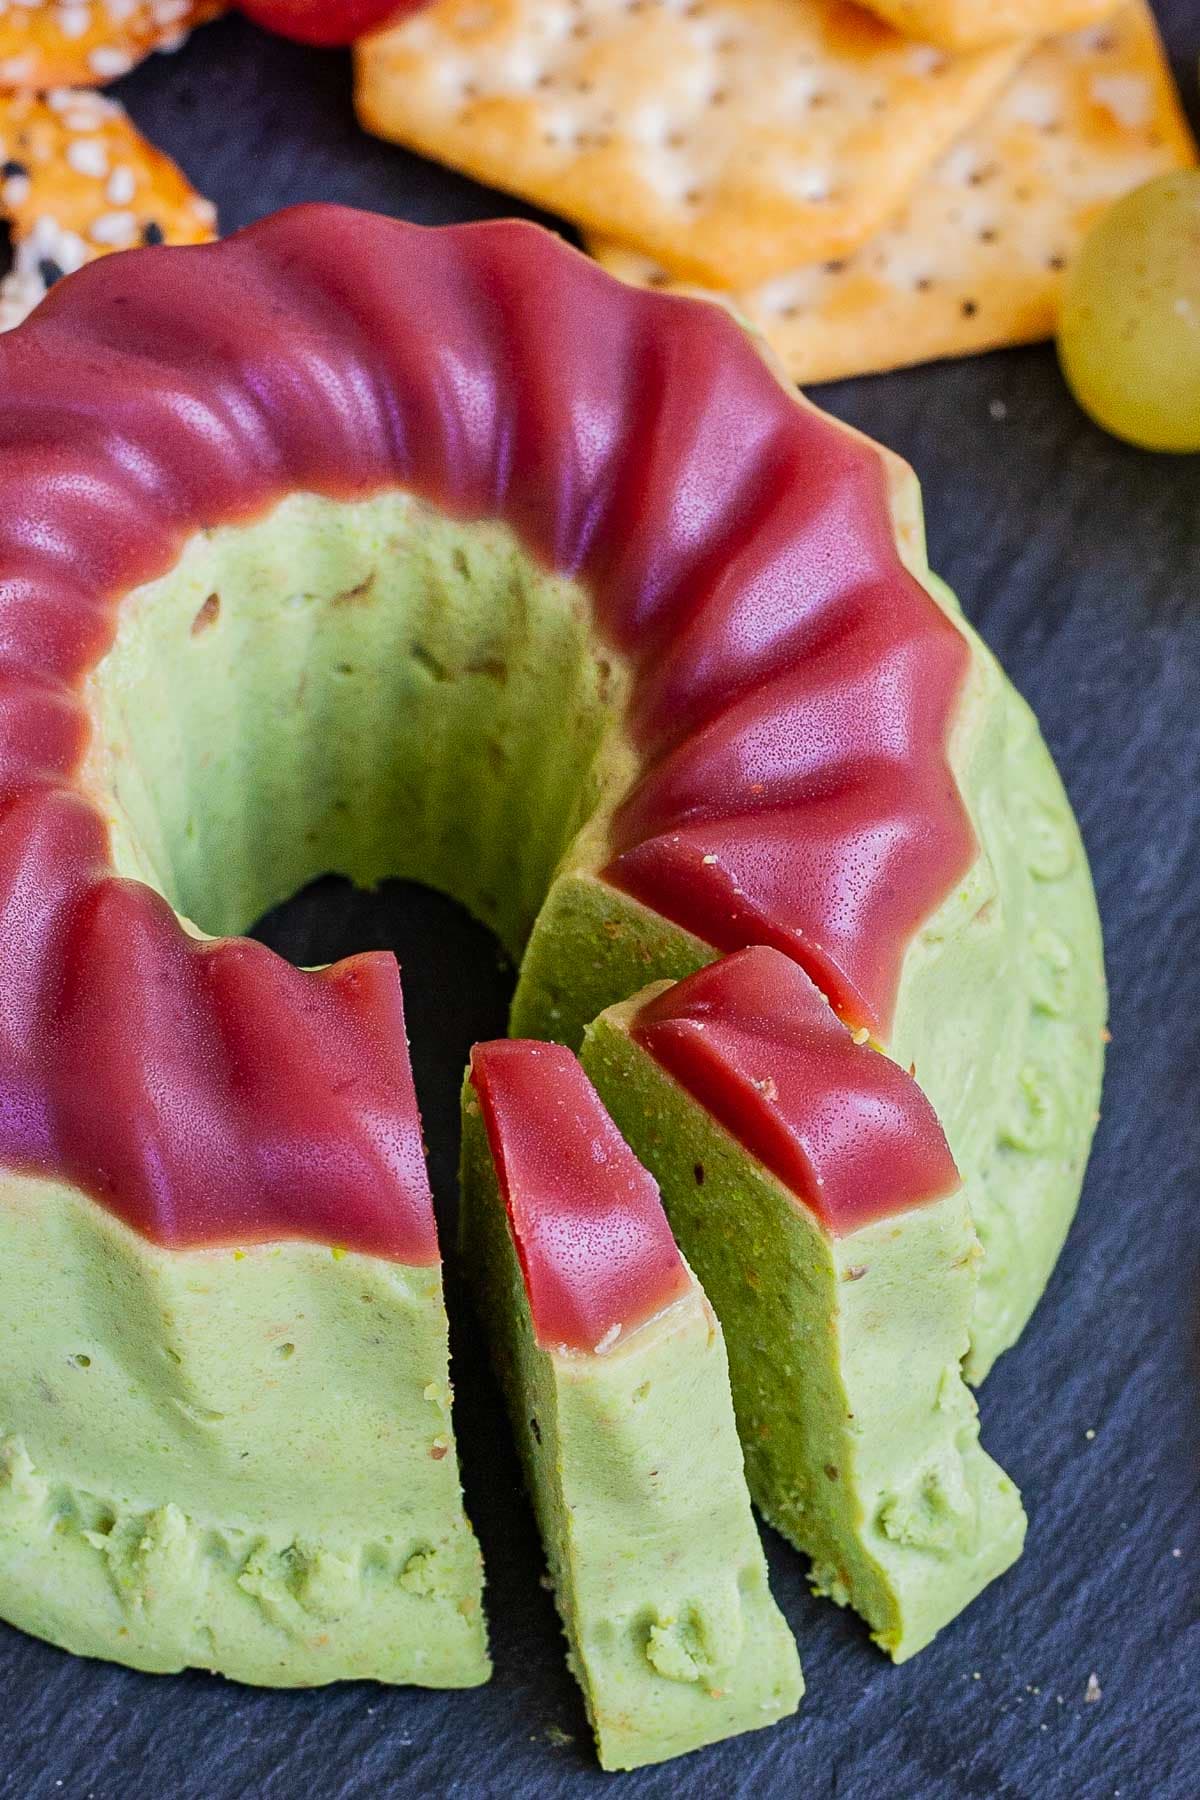 Green cheese shaped as a bundt topped with dark pink jelly. Two slices are slightly ajar. 